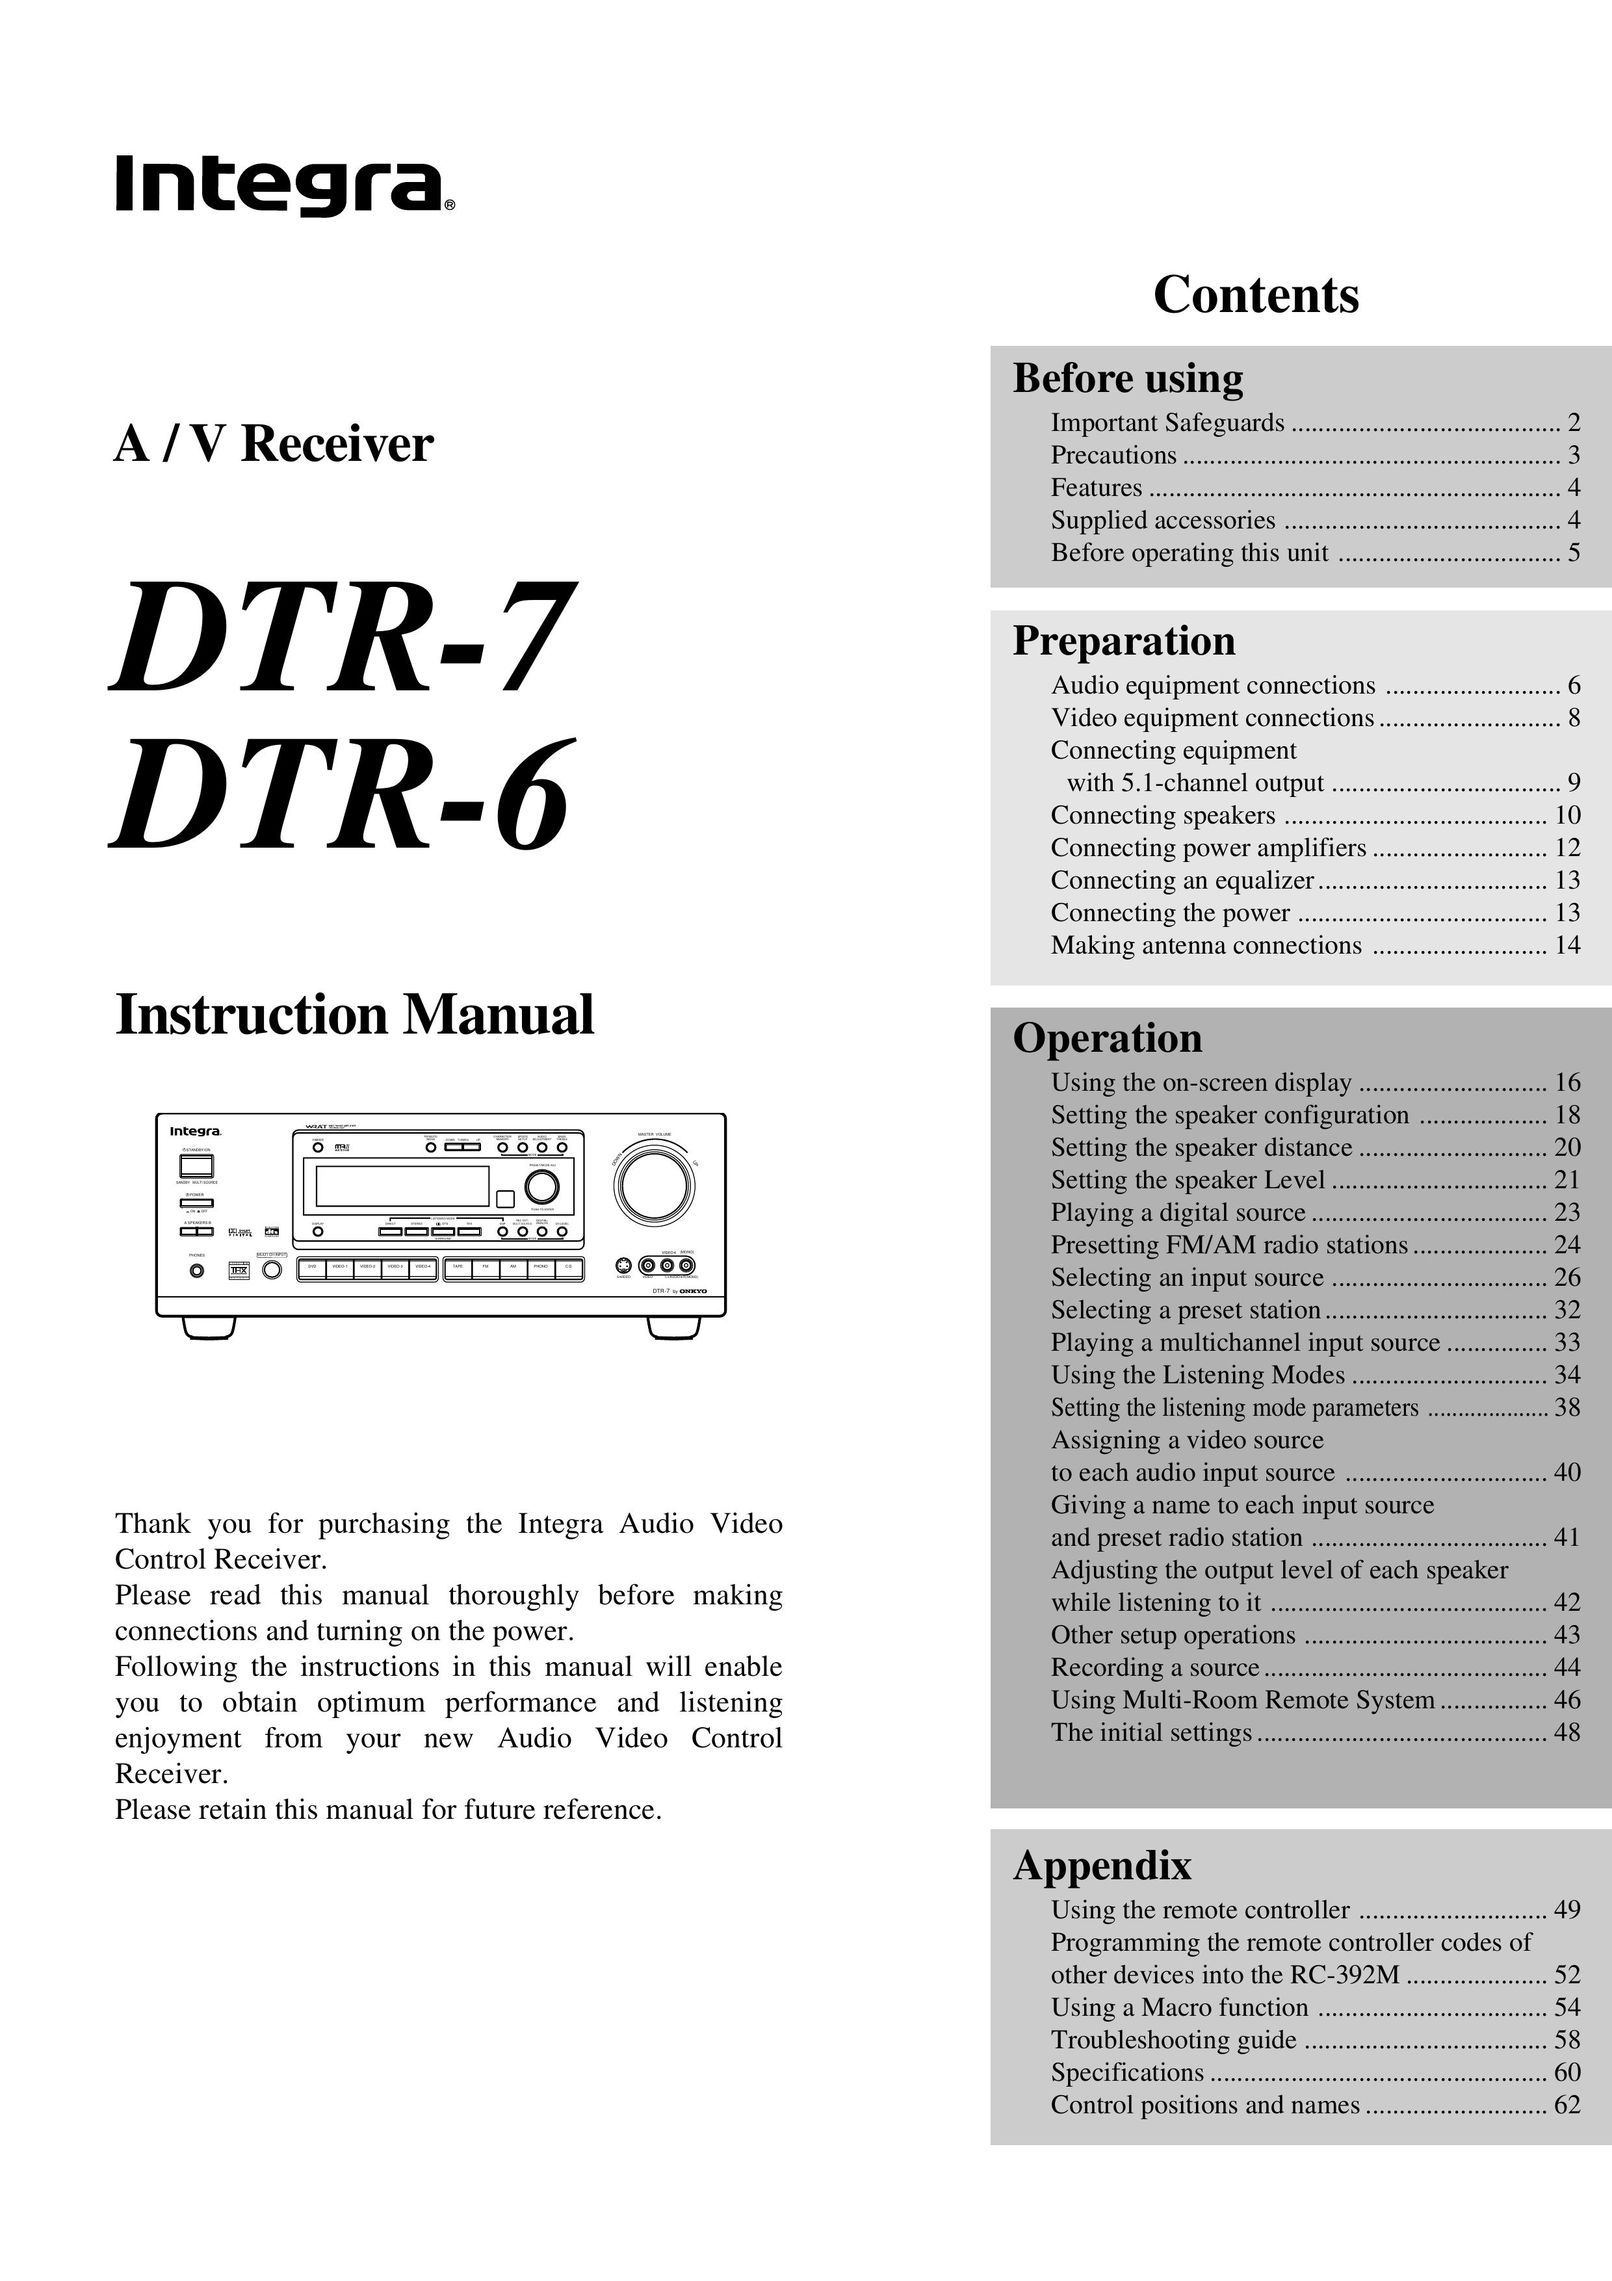 Integra DTR-7 Stereo Receiver User Manual (Page 1)